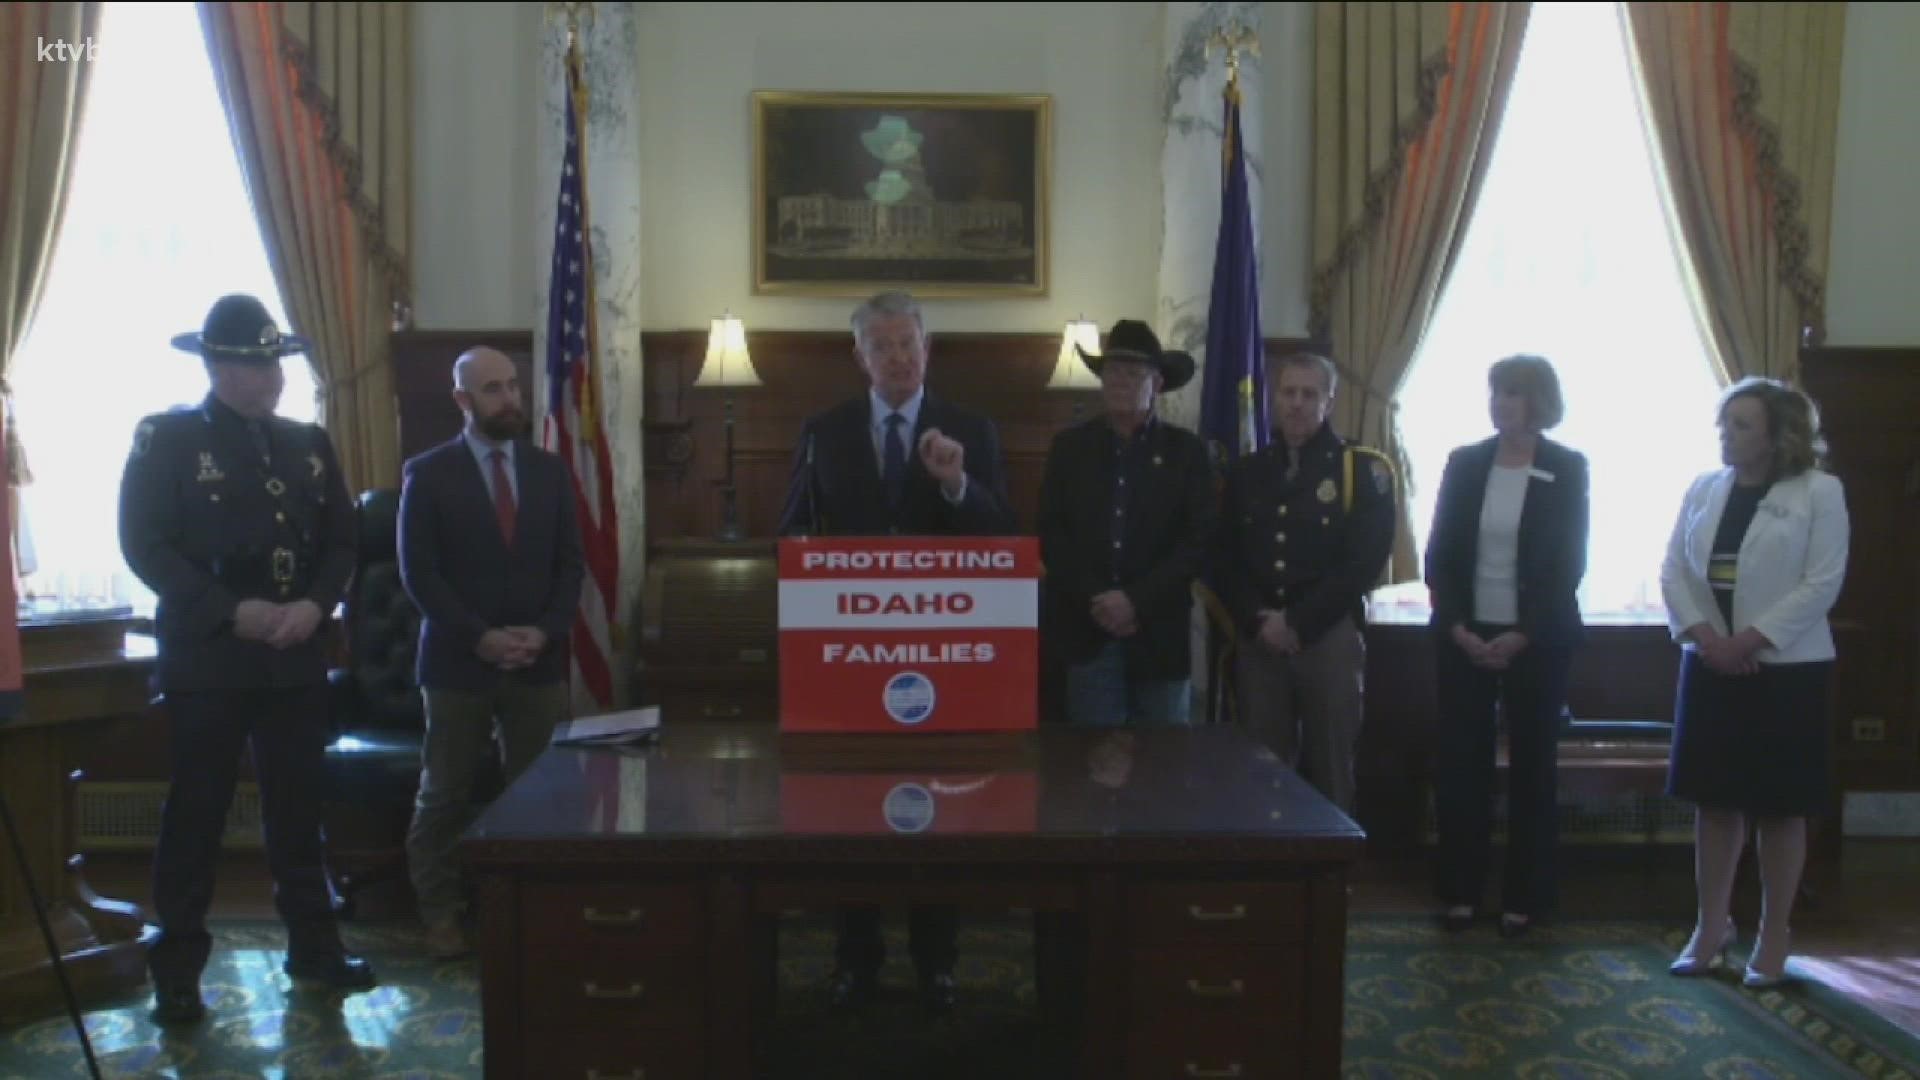 The Idaho governor said "Operation Esto Perpetua" will bring together law enforcement and communities in new ways.